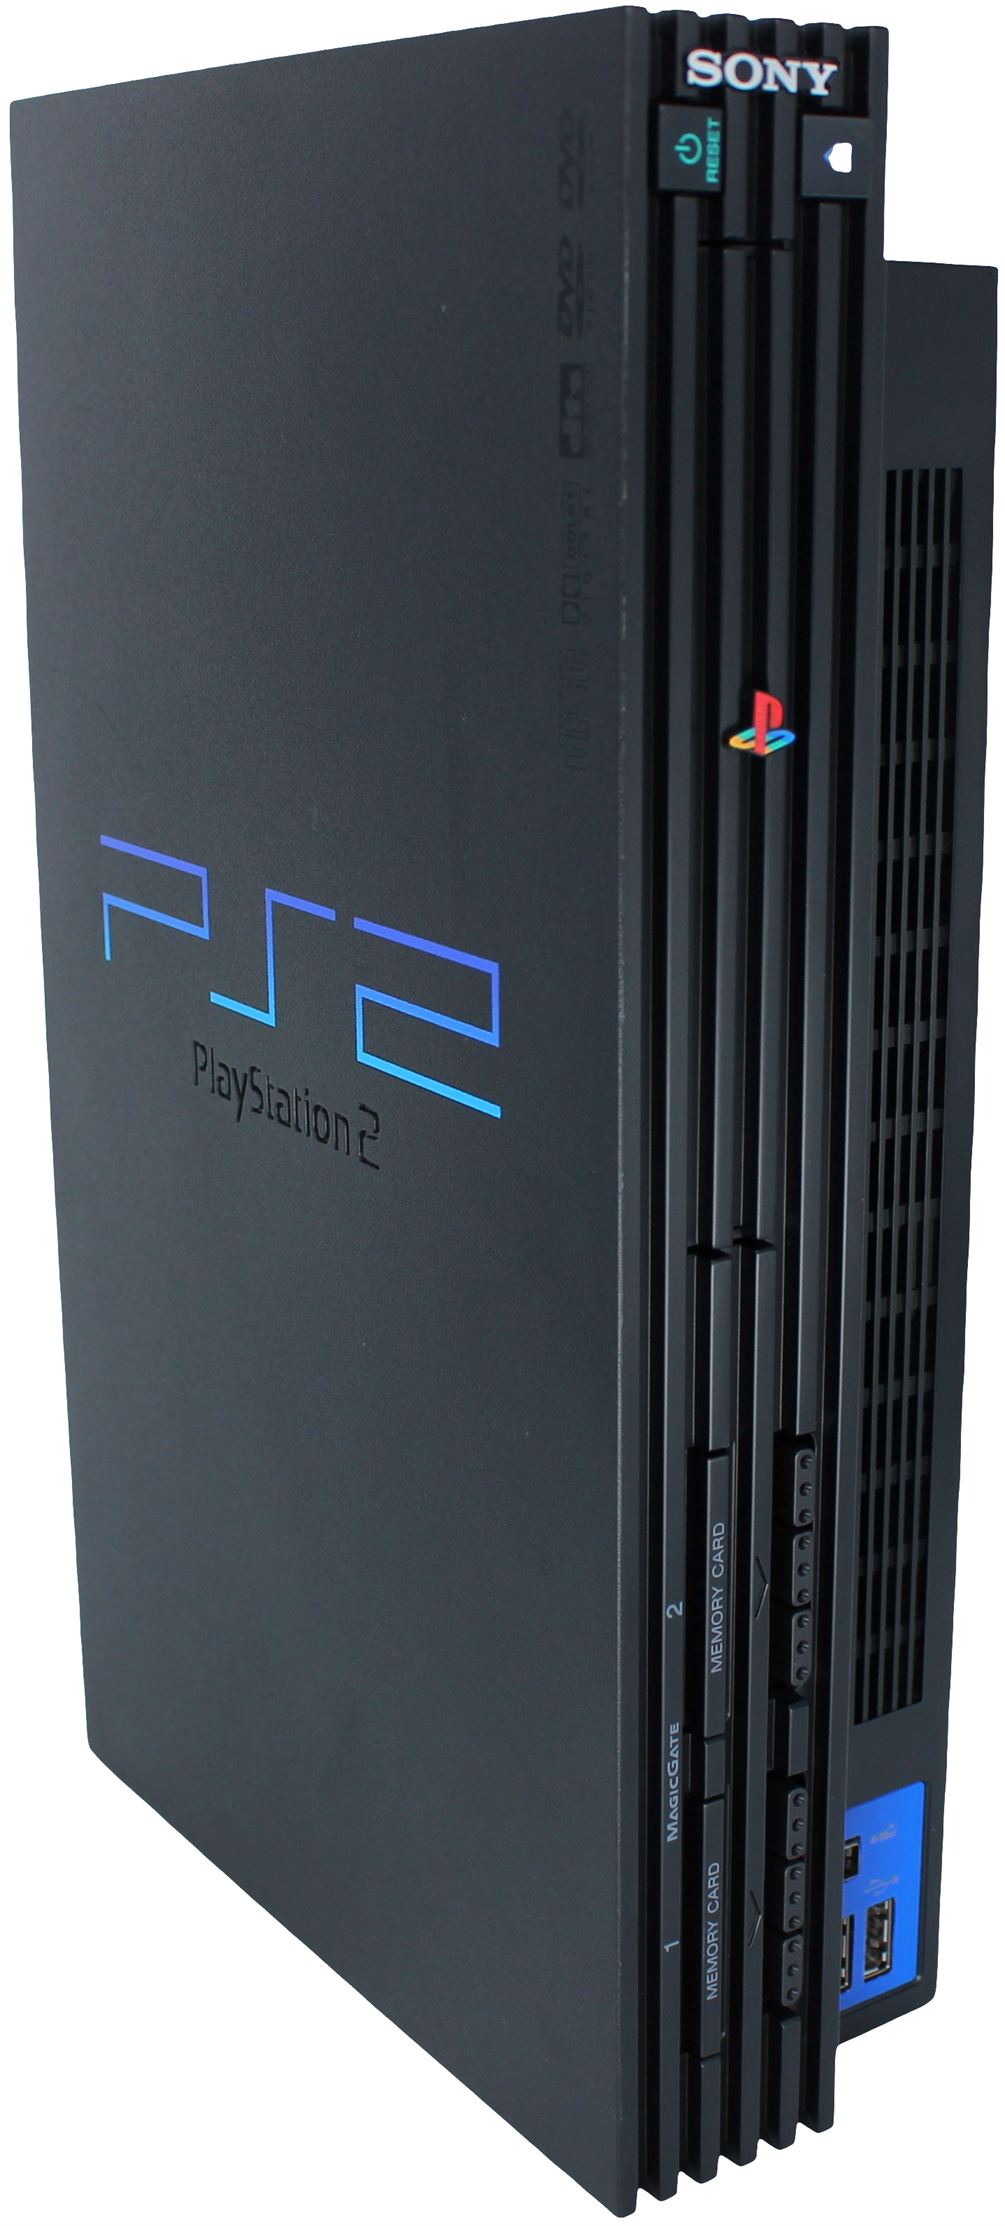 Sony PlayStation 2 (PS2) Dual-Player Bundle